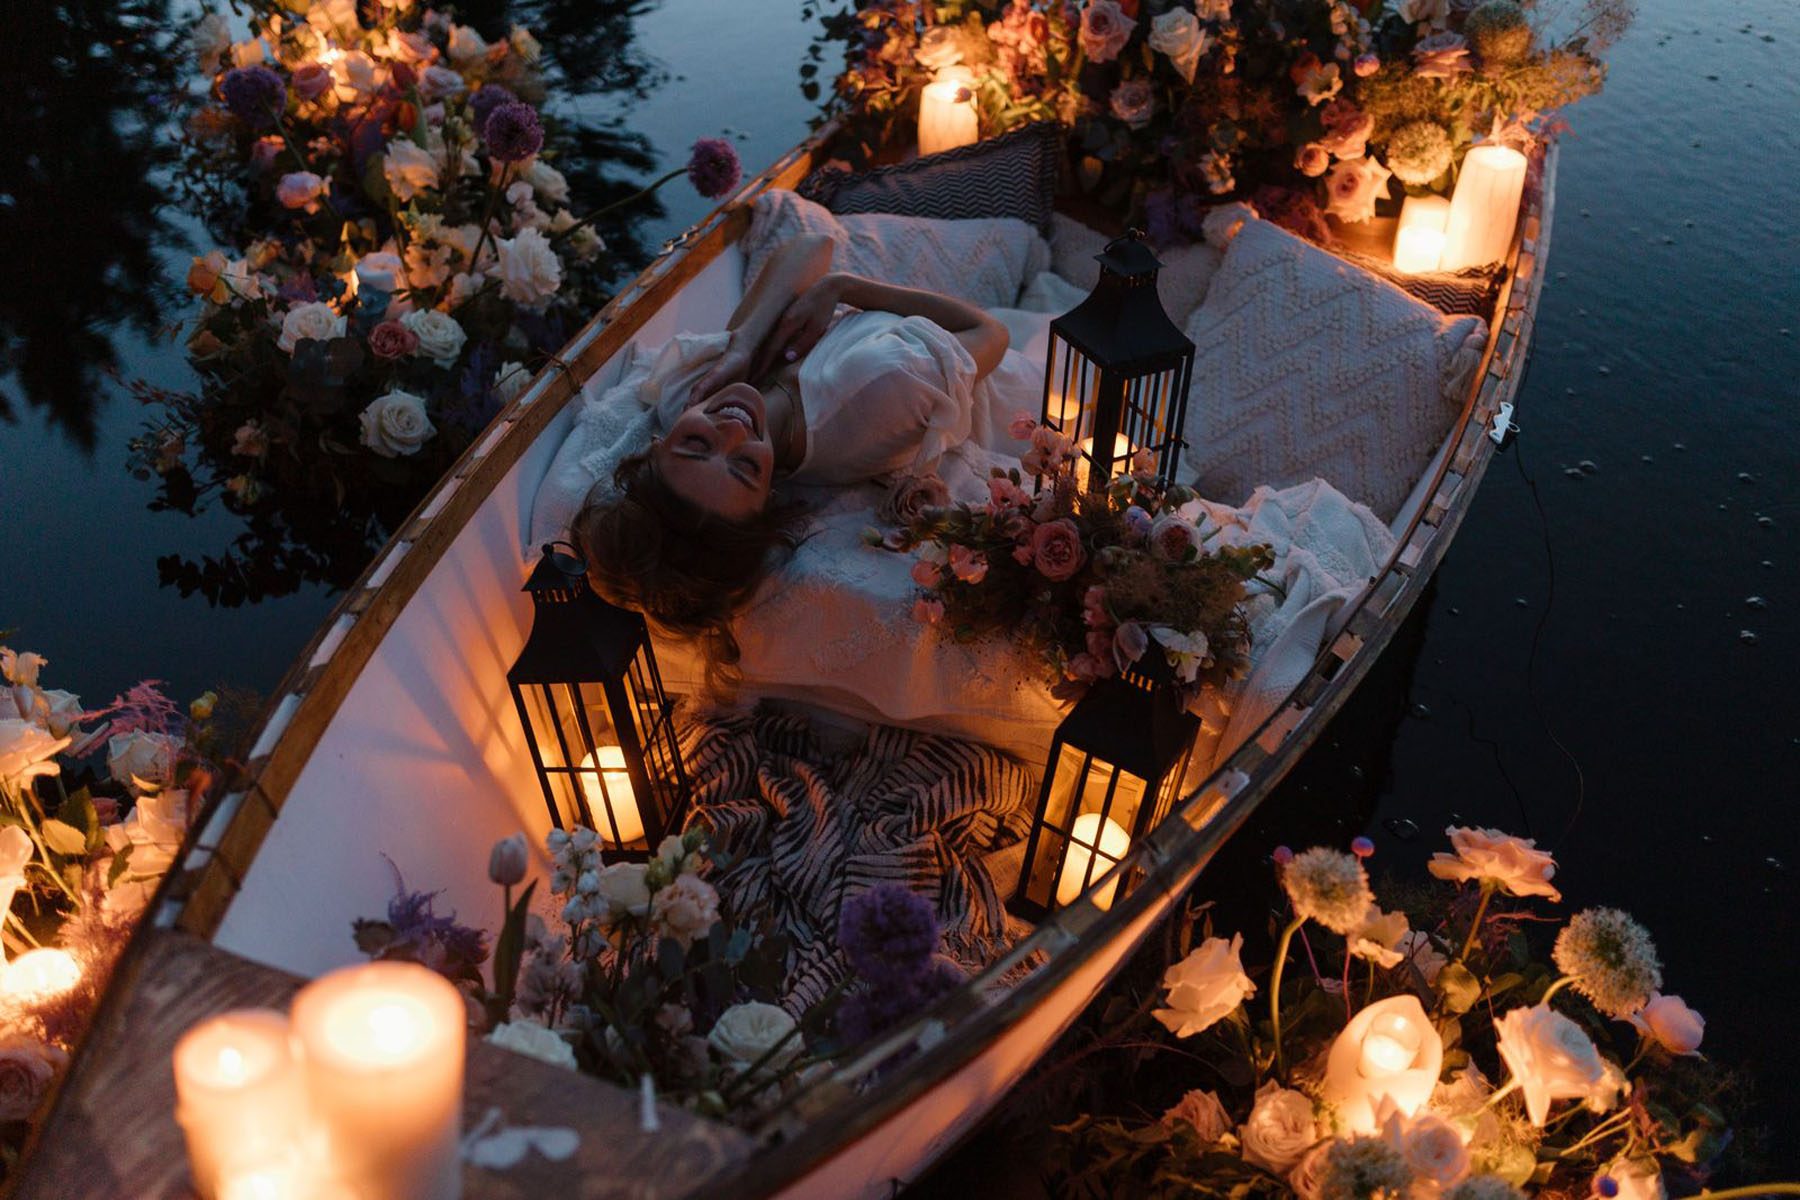 Woman lying in canoe on a candlelit lake surrounded by floral arrangments